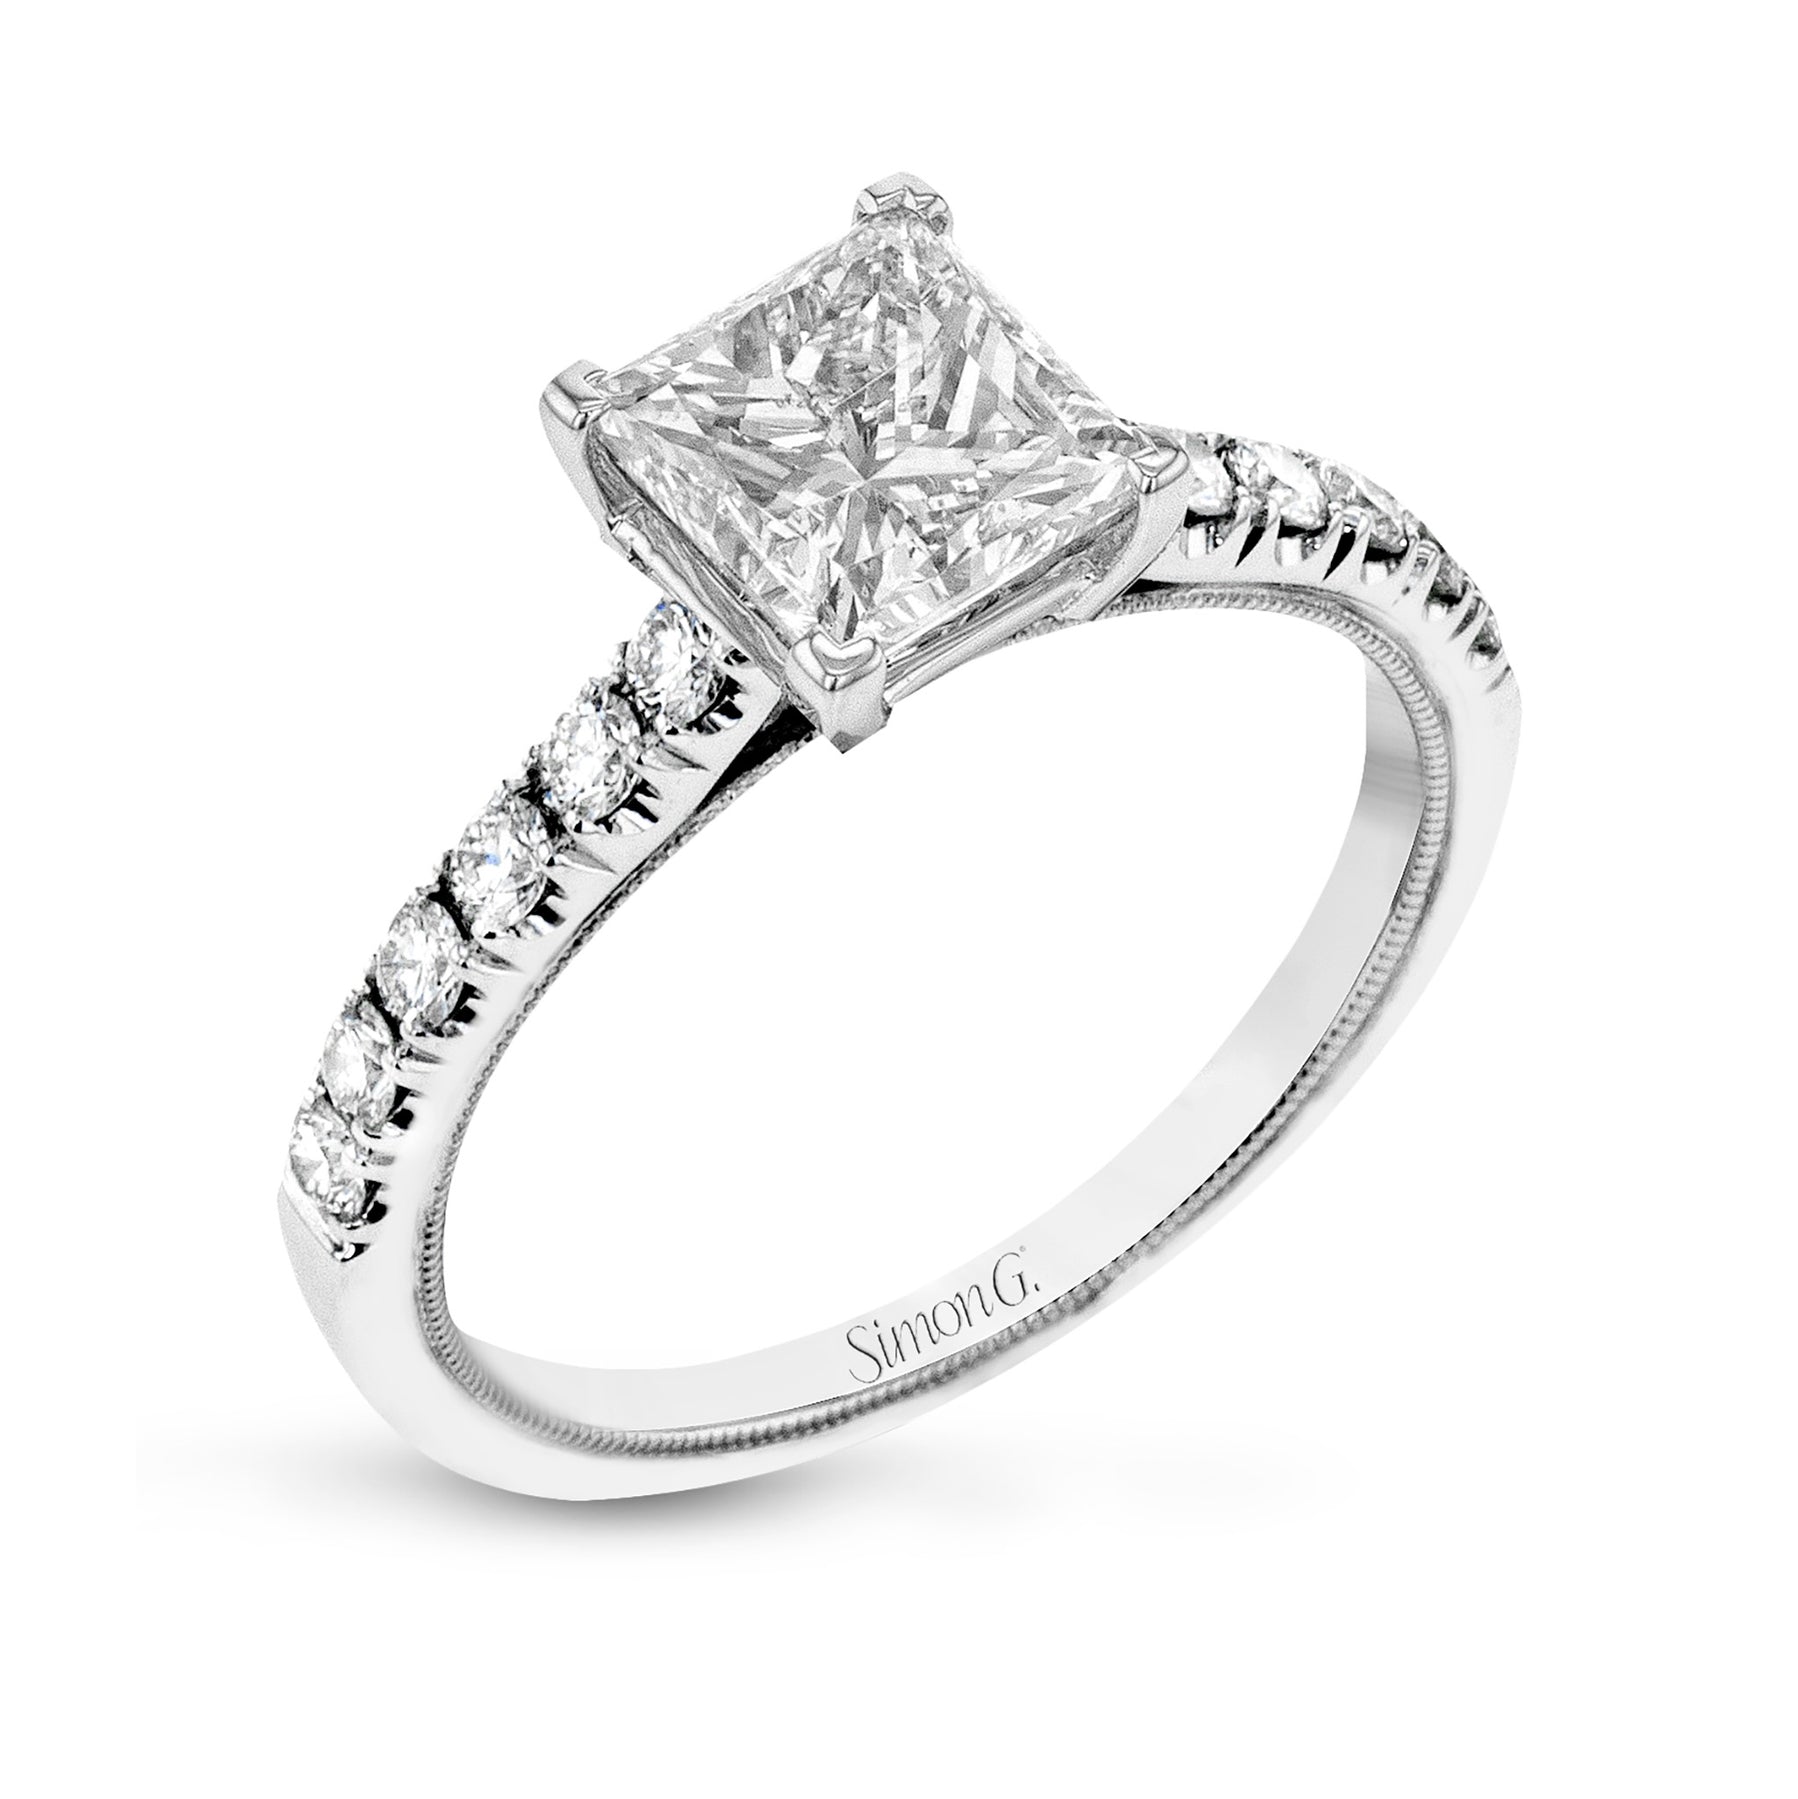 Princess-Cut Engagement Ring In 18k Gold With Diamonds TR738-PC